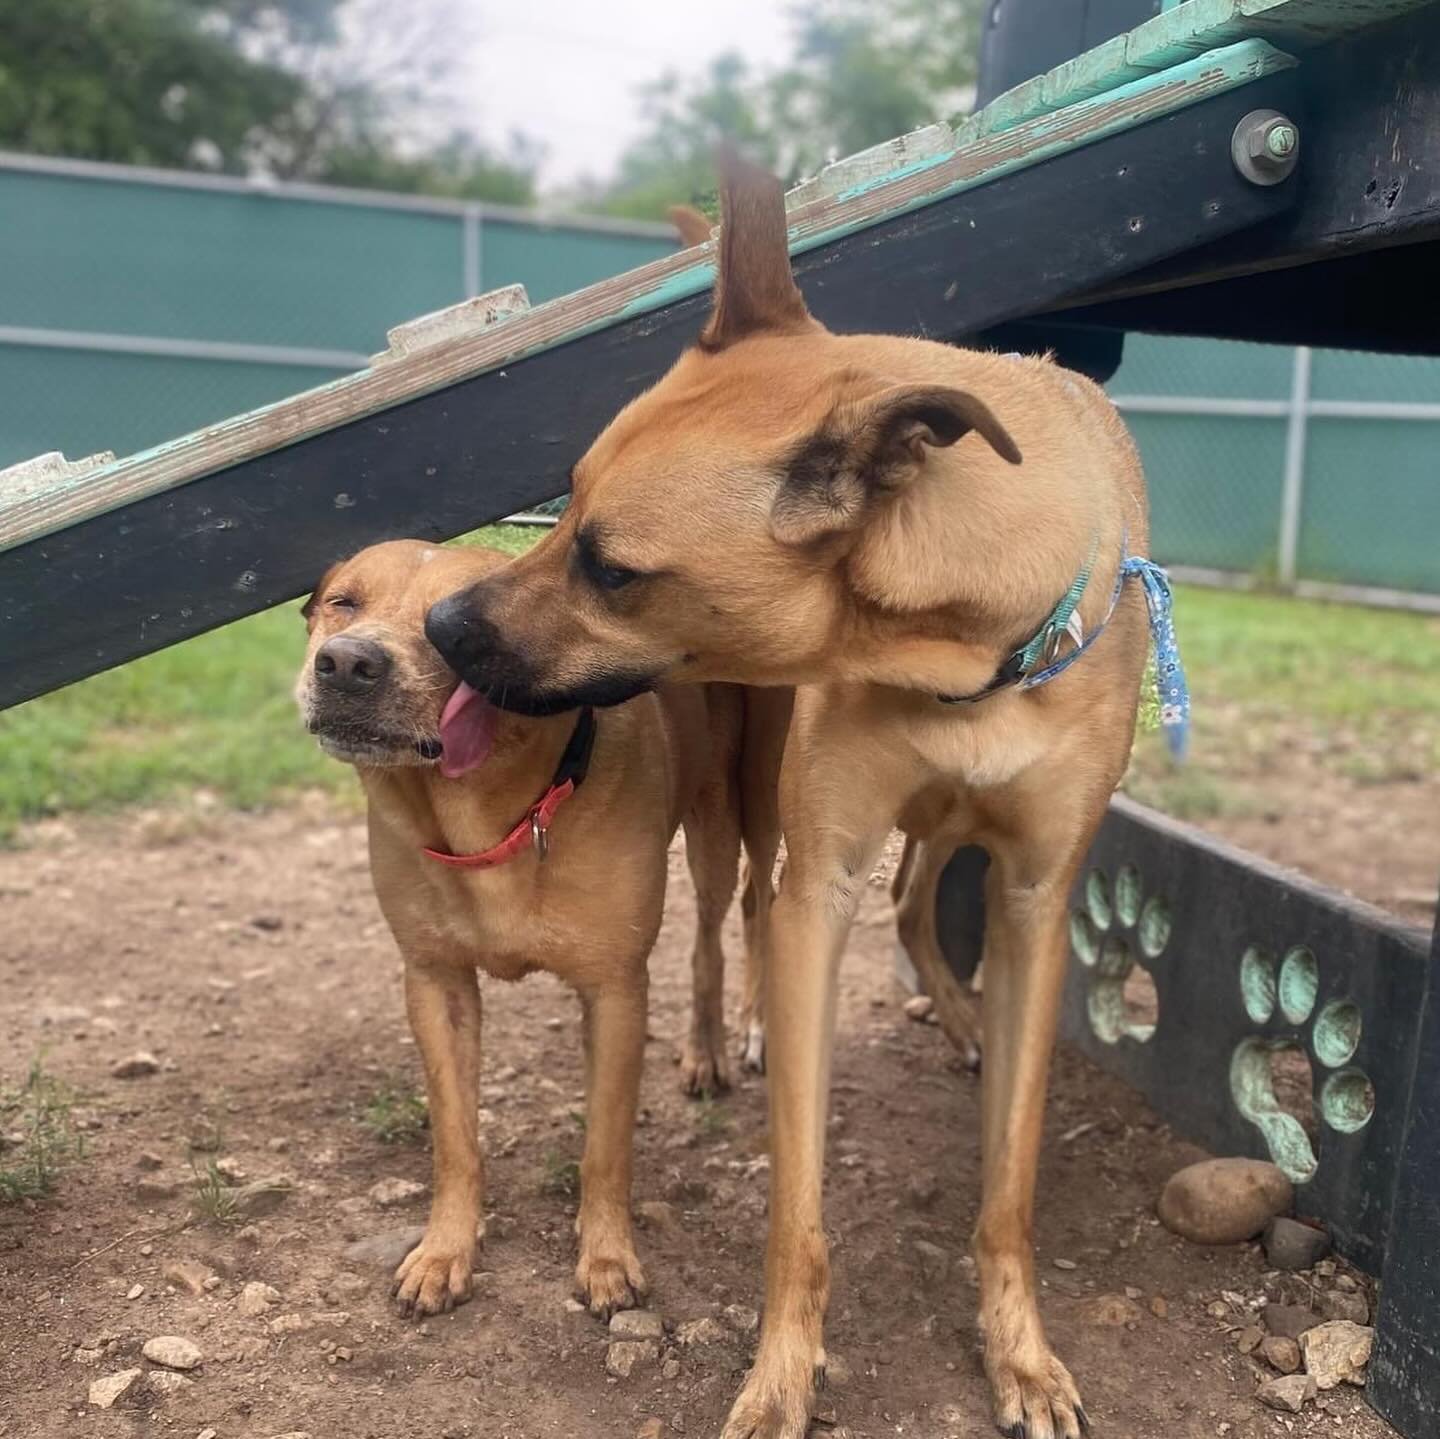 Rocky is determined to win Emmy&rsquo;s heart! ❤️❤️❤️
.
.
#pupsandpalsoakhill #pupsandpals #pupsandpalspetlounge #doggydaycare #dogdaycare #dogdaycareaustin #dogdaycarefun #dogdaycarelife #doggydaycareandboarding #puppylove #puppykisses #besties